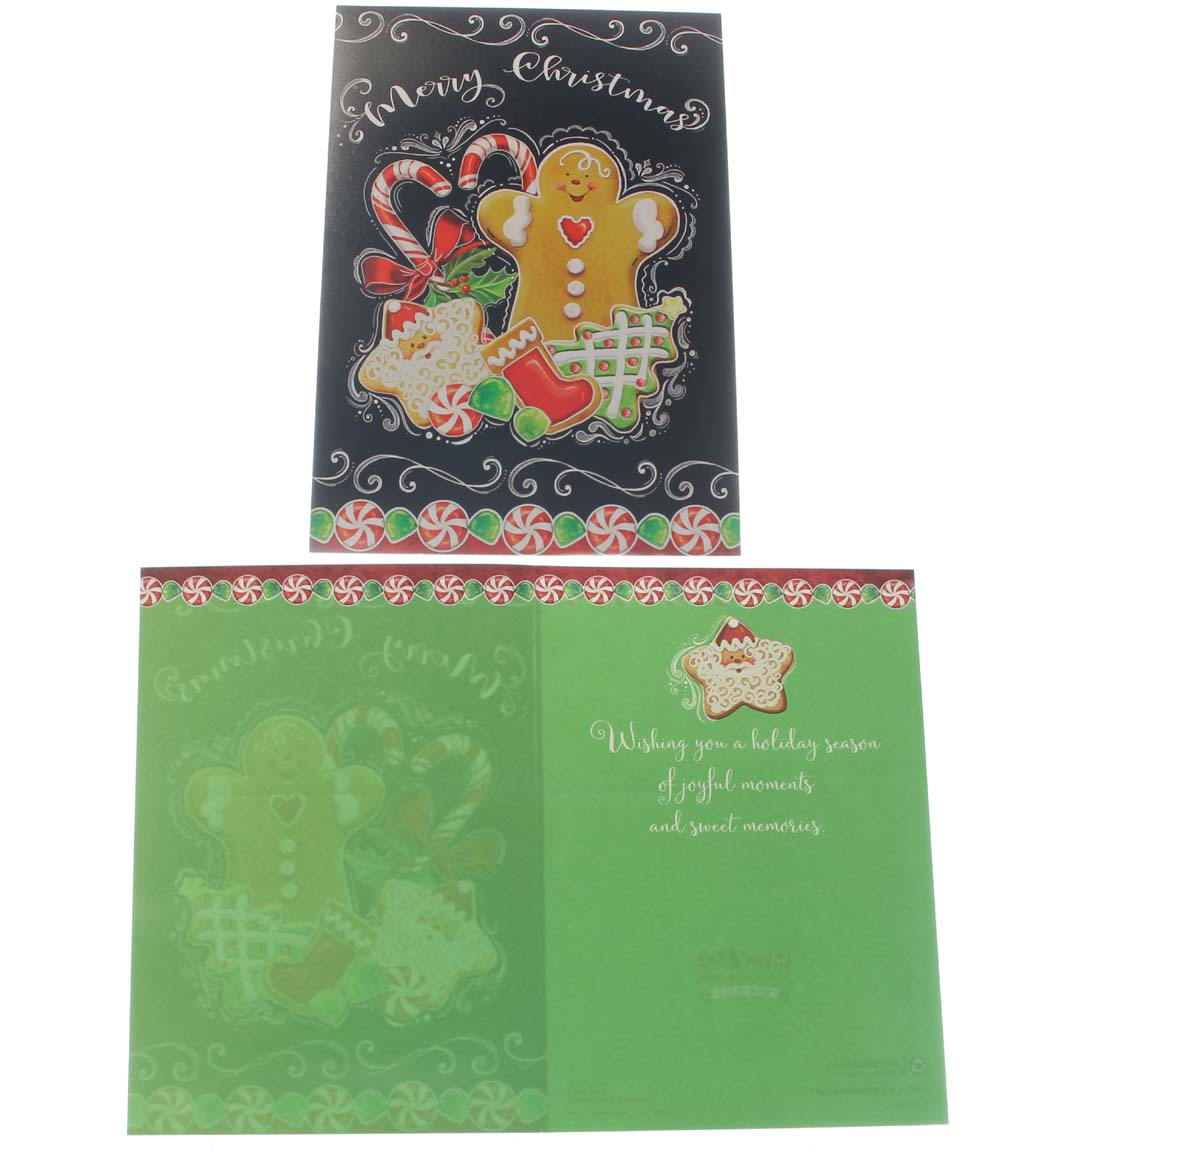 Christmas Cards, Boxed Assortment, 20 Cards/22 Envelopes, by Gina Jane